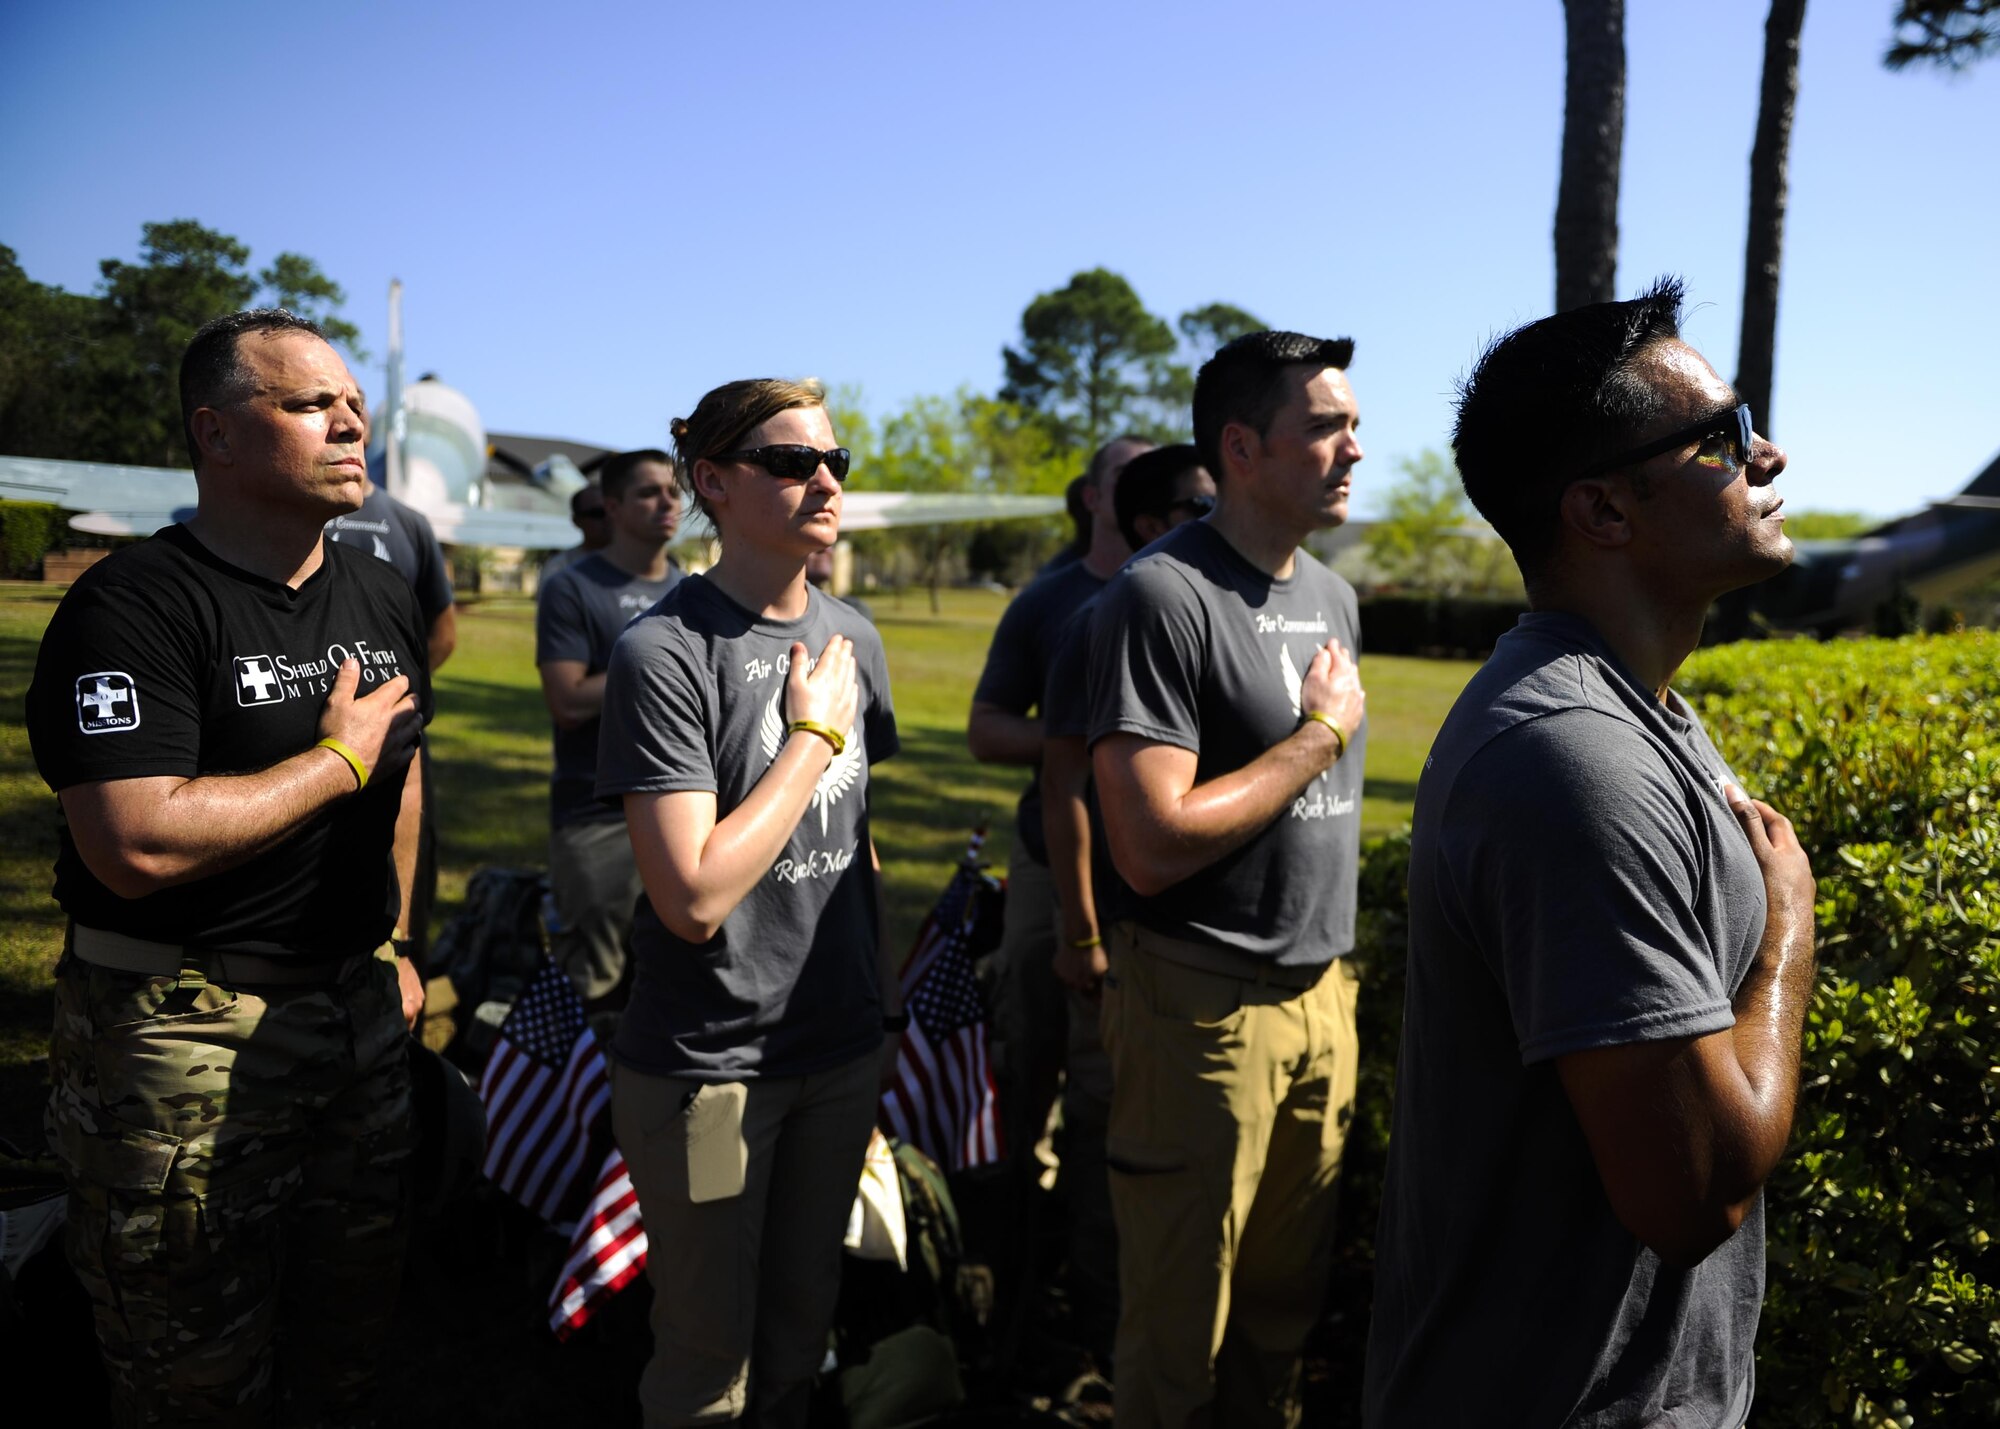 Air Force Special Operations Command Airmen pay their respects during the National Anthem at Hurlburt Field, Fla., March 20, 2015. Eleven Air Commandos carried flags with the names of the seven fallen Special Operations Command Marines and four Army National Guard air crew members during a 450-mile ruck march from MacDill Air Force Base, Fla., to Hurlburt Field.